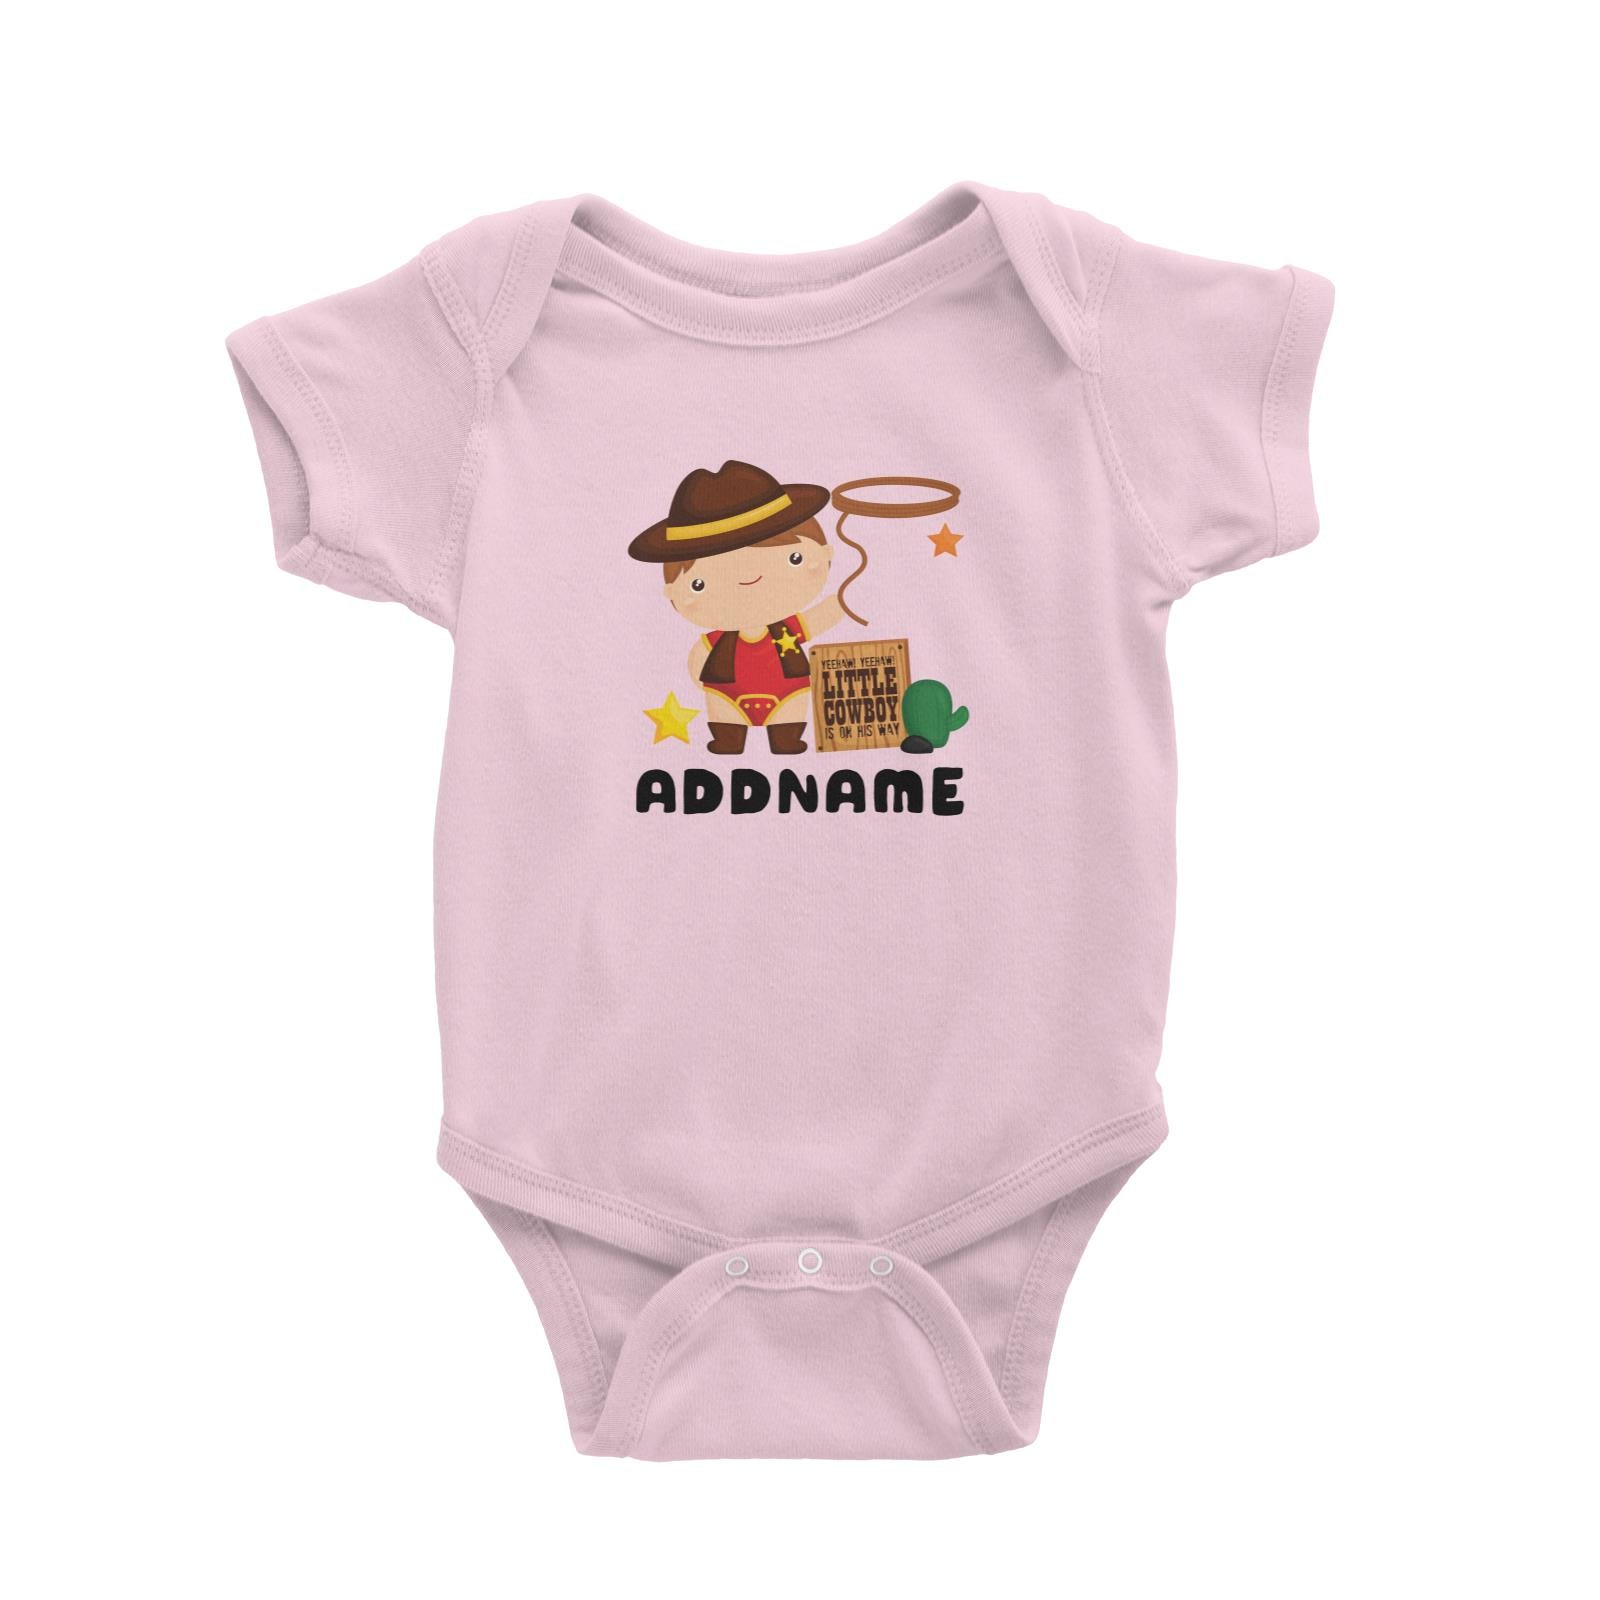 Birthday Cowboy Style Yeehaw Little Cowboy Is On His Way Addname Baby Romper